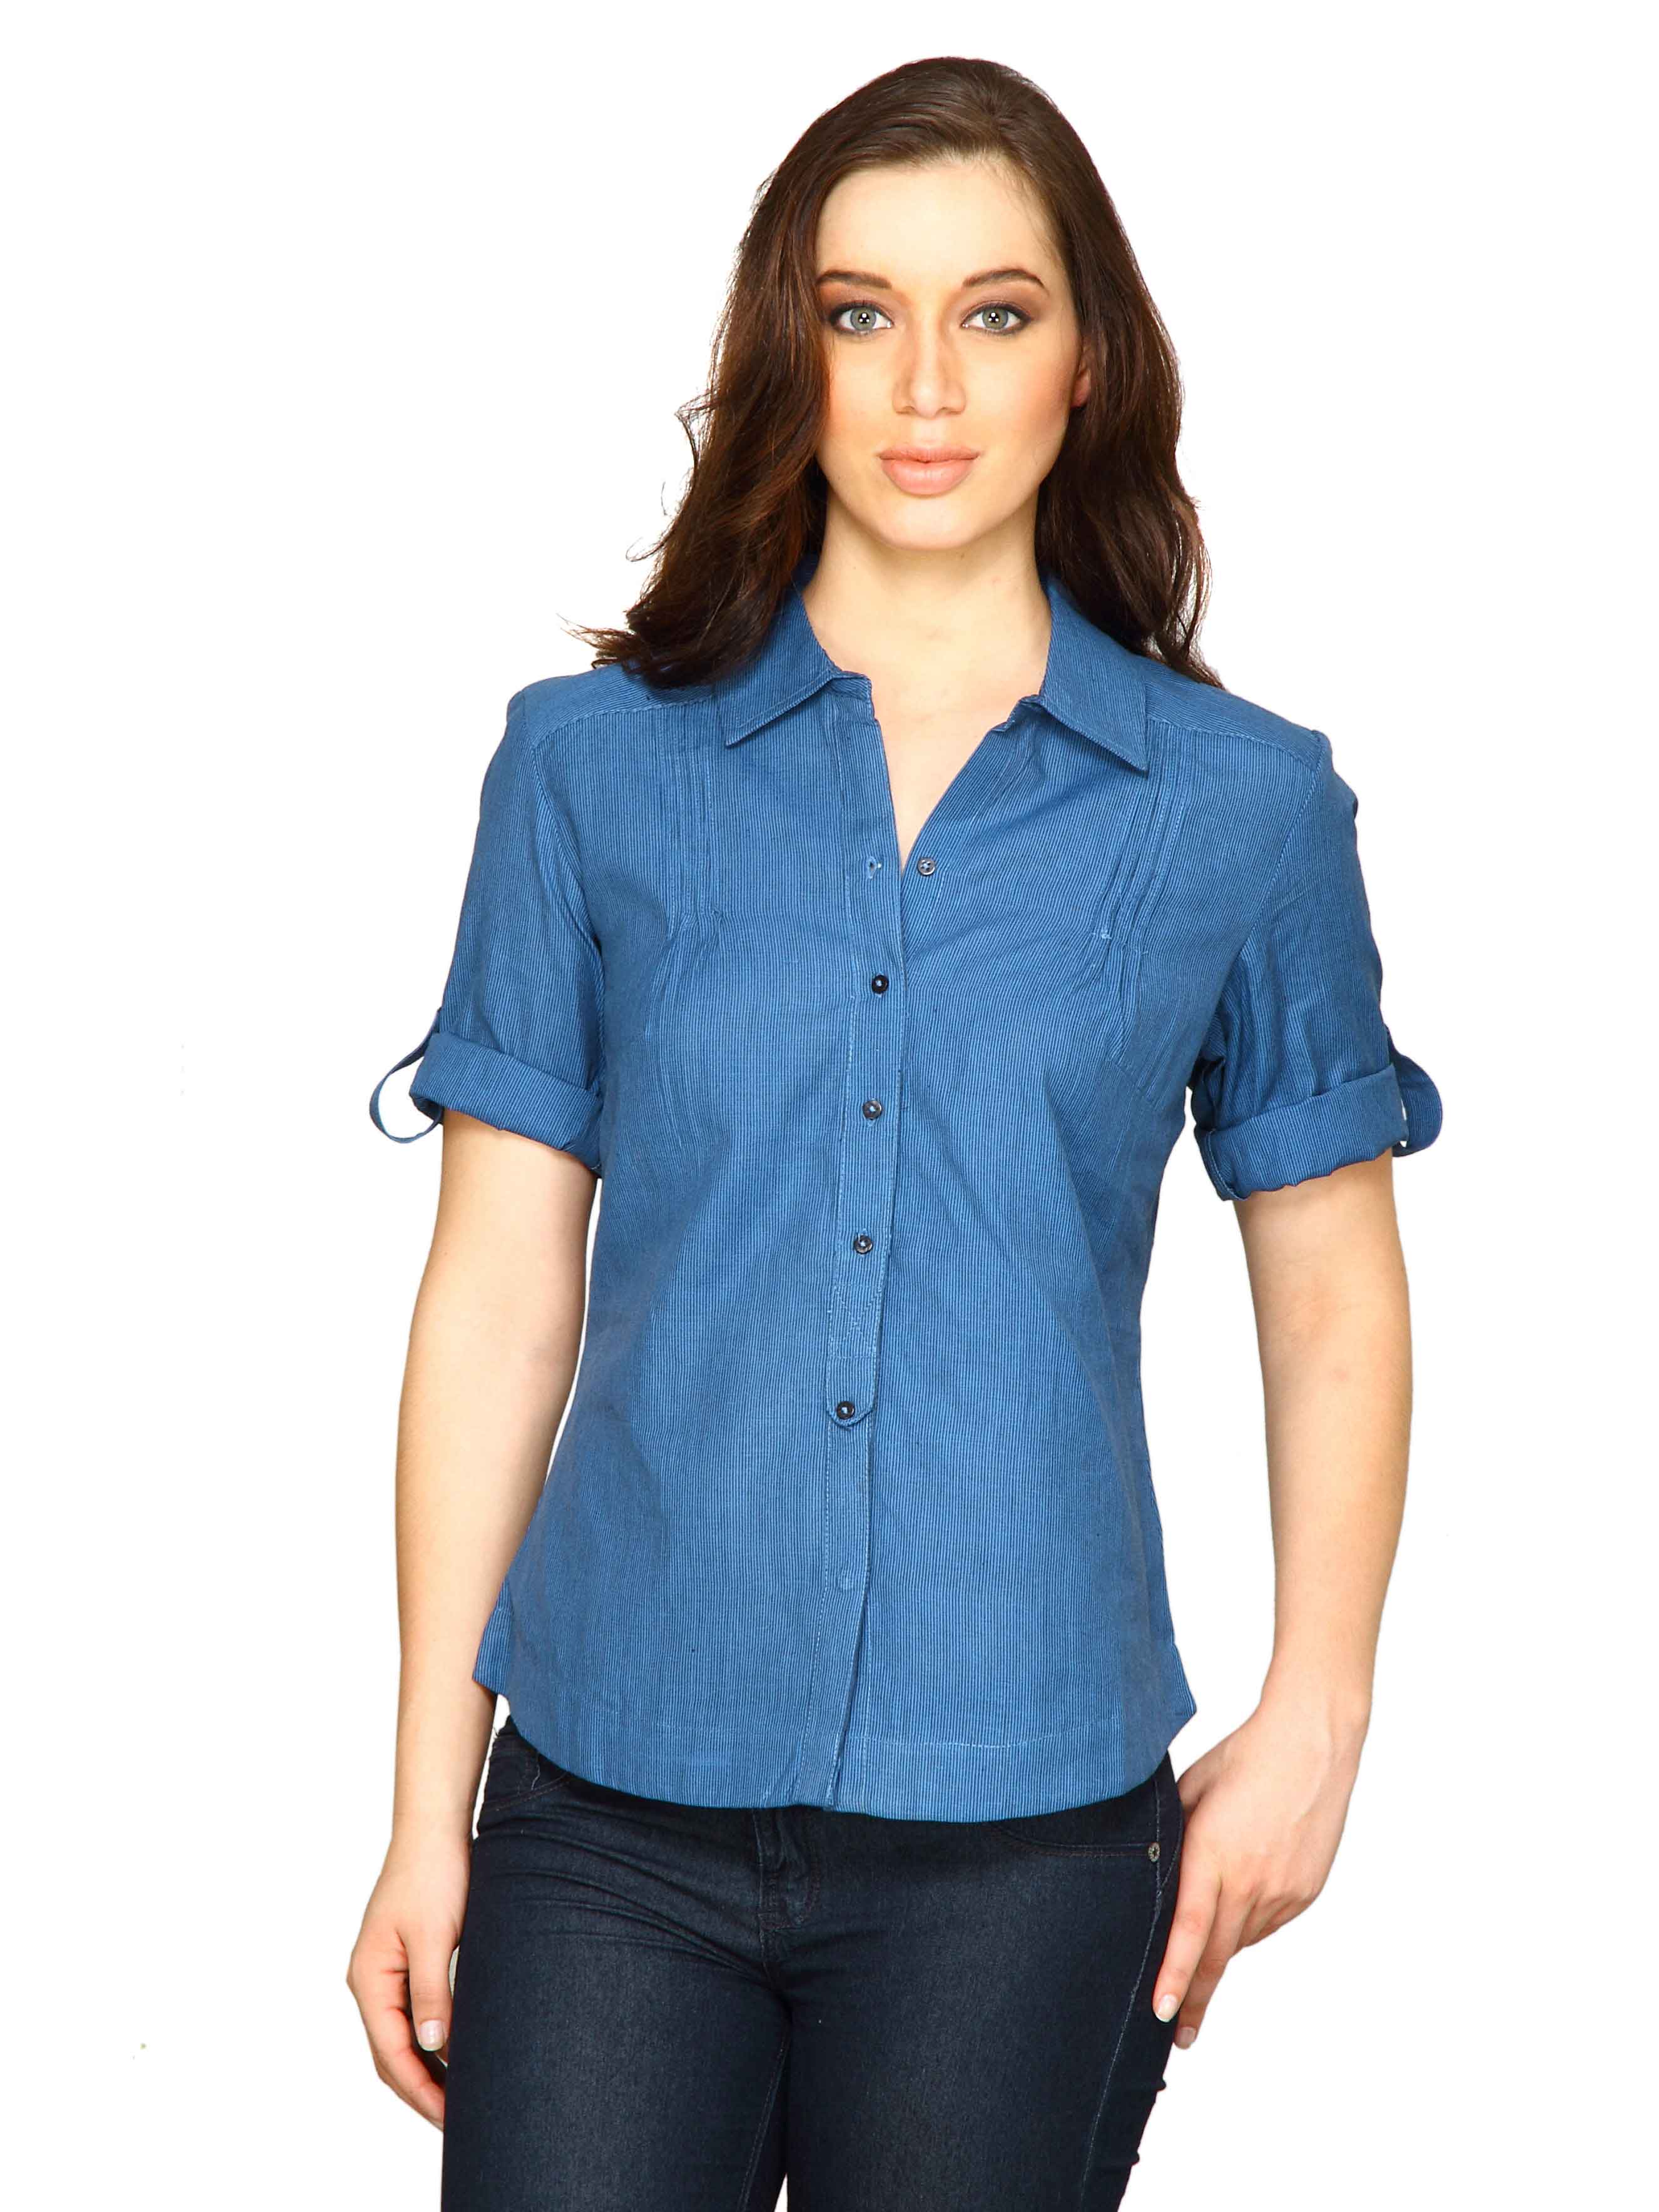 Scullers For Her Women Wow Woven Navy Blue Tops